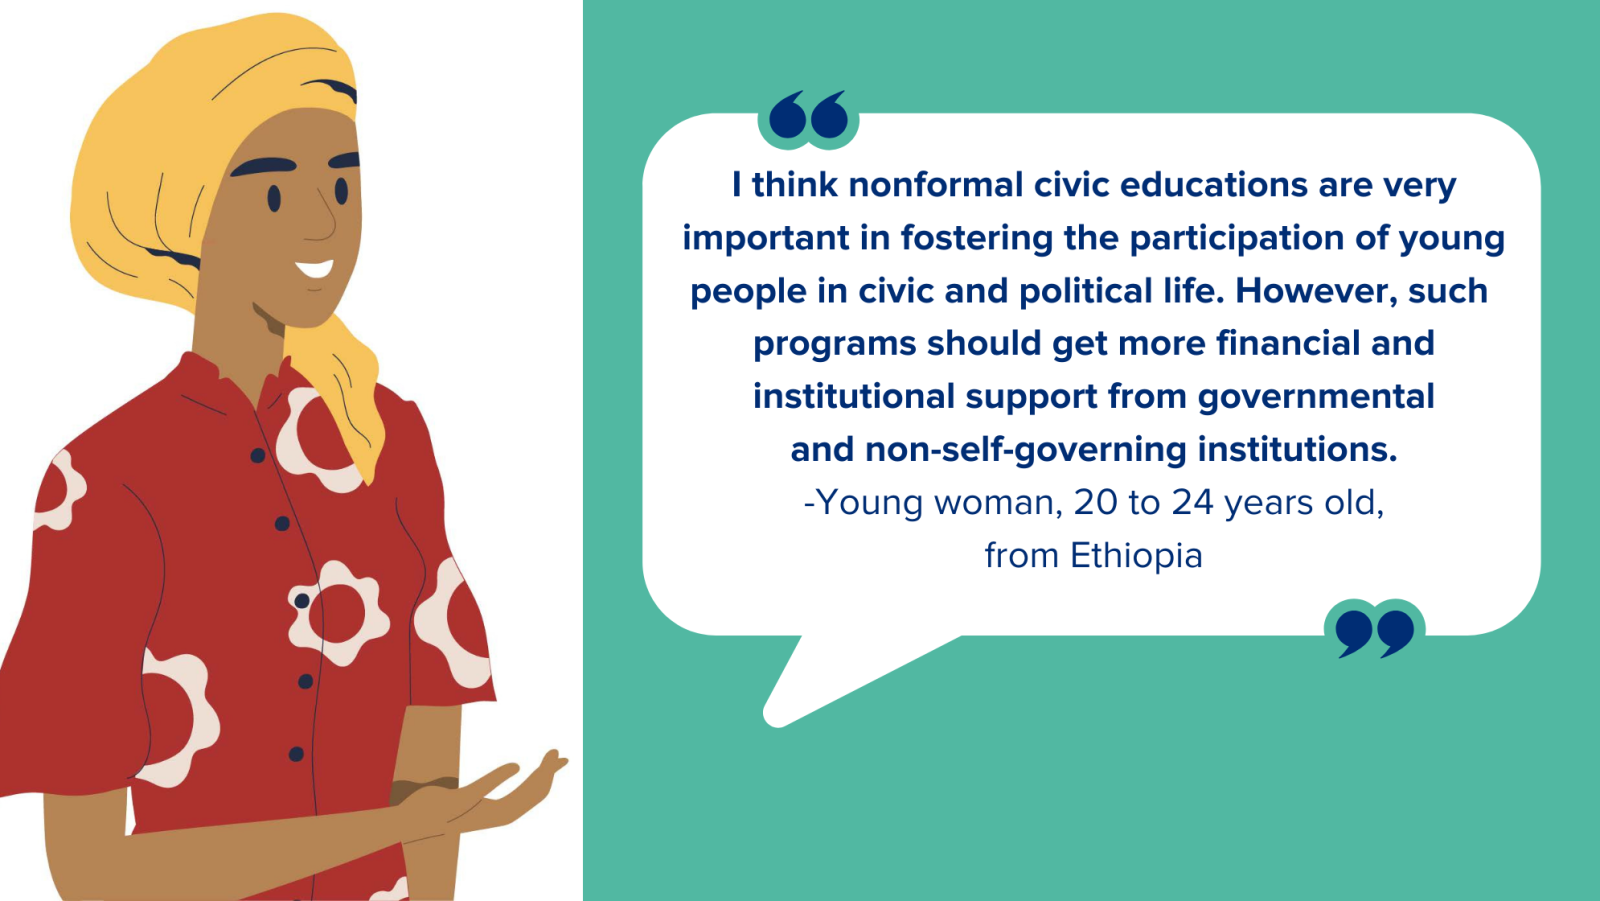 I think nonformal civic educations are very important in fostering the participation of young people in civic and political life. However, such  programs should get more financial and institutional support from governmental and non-self-governing institutions. -Young woman, 20 to 24 years old, from Ethiopia